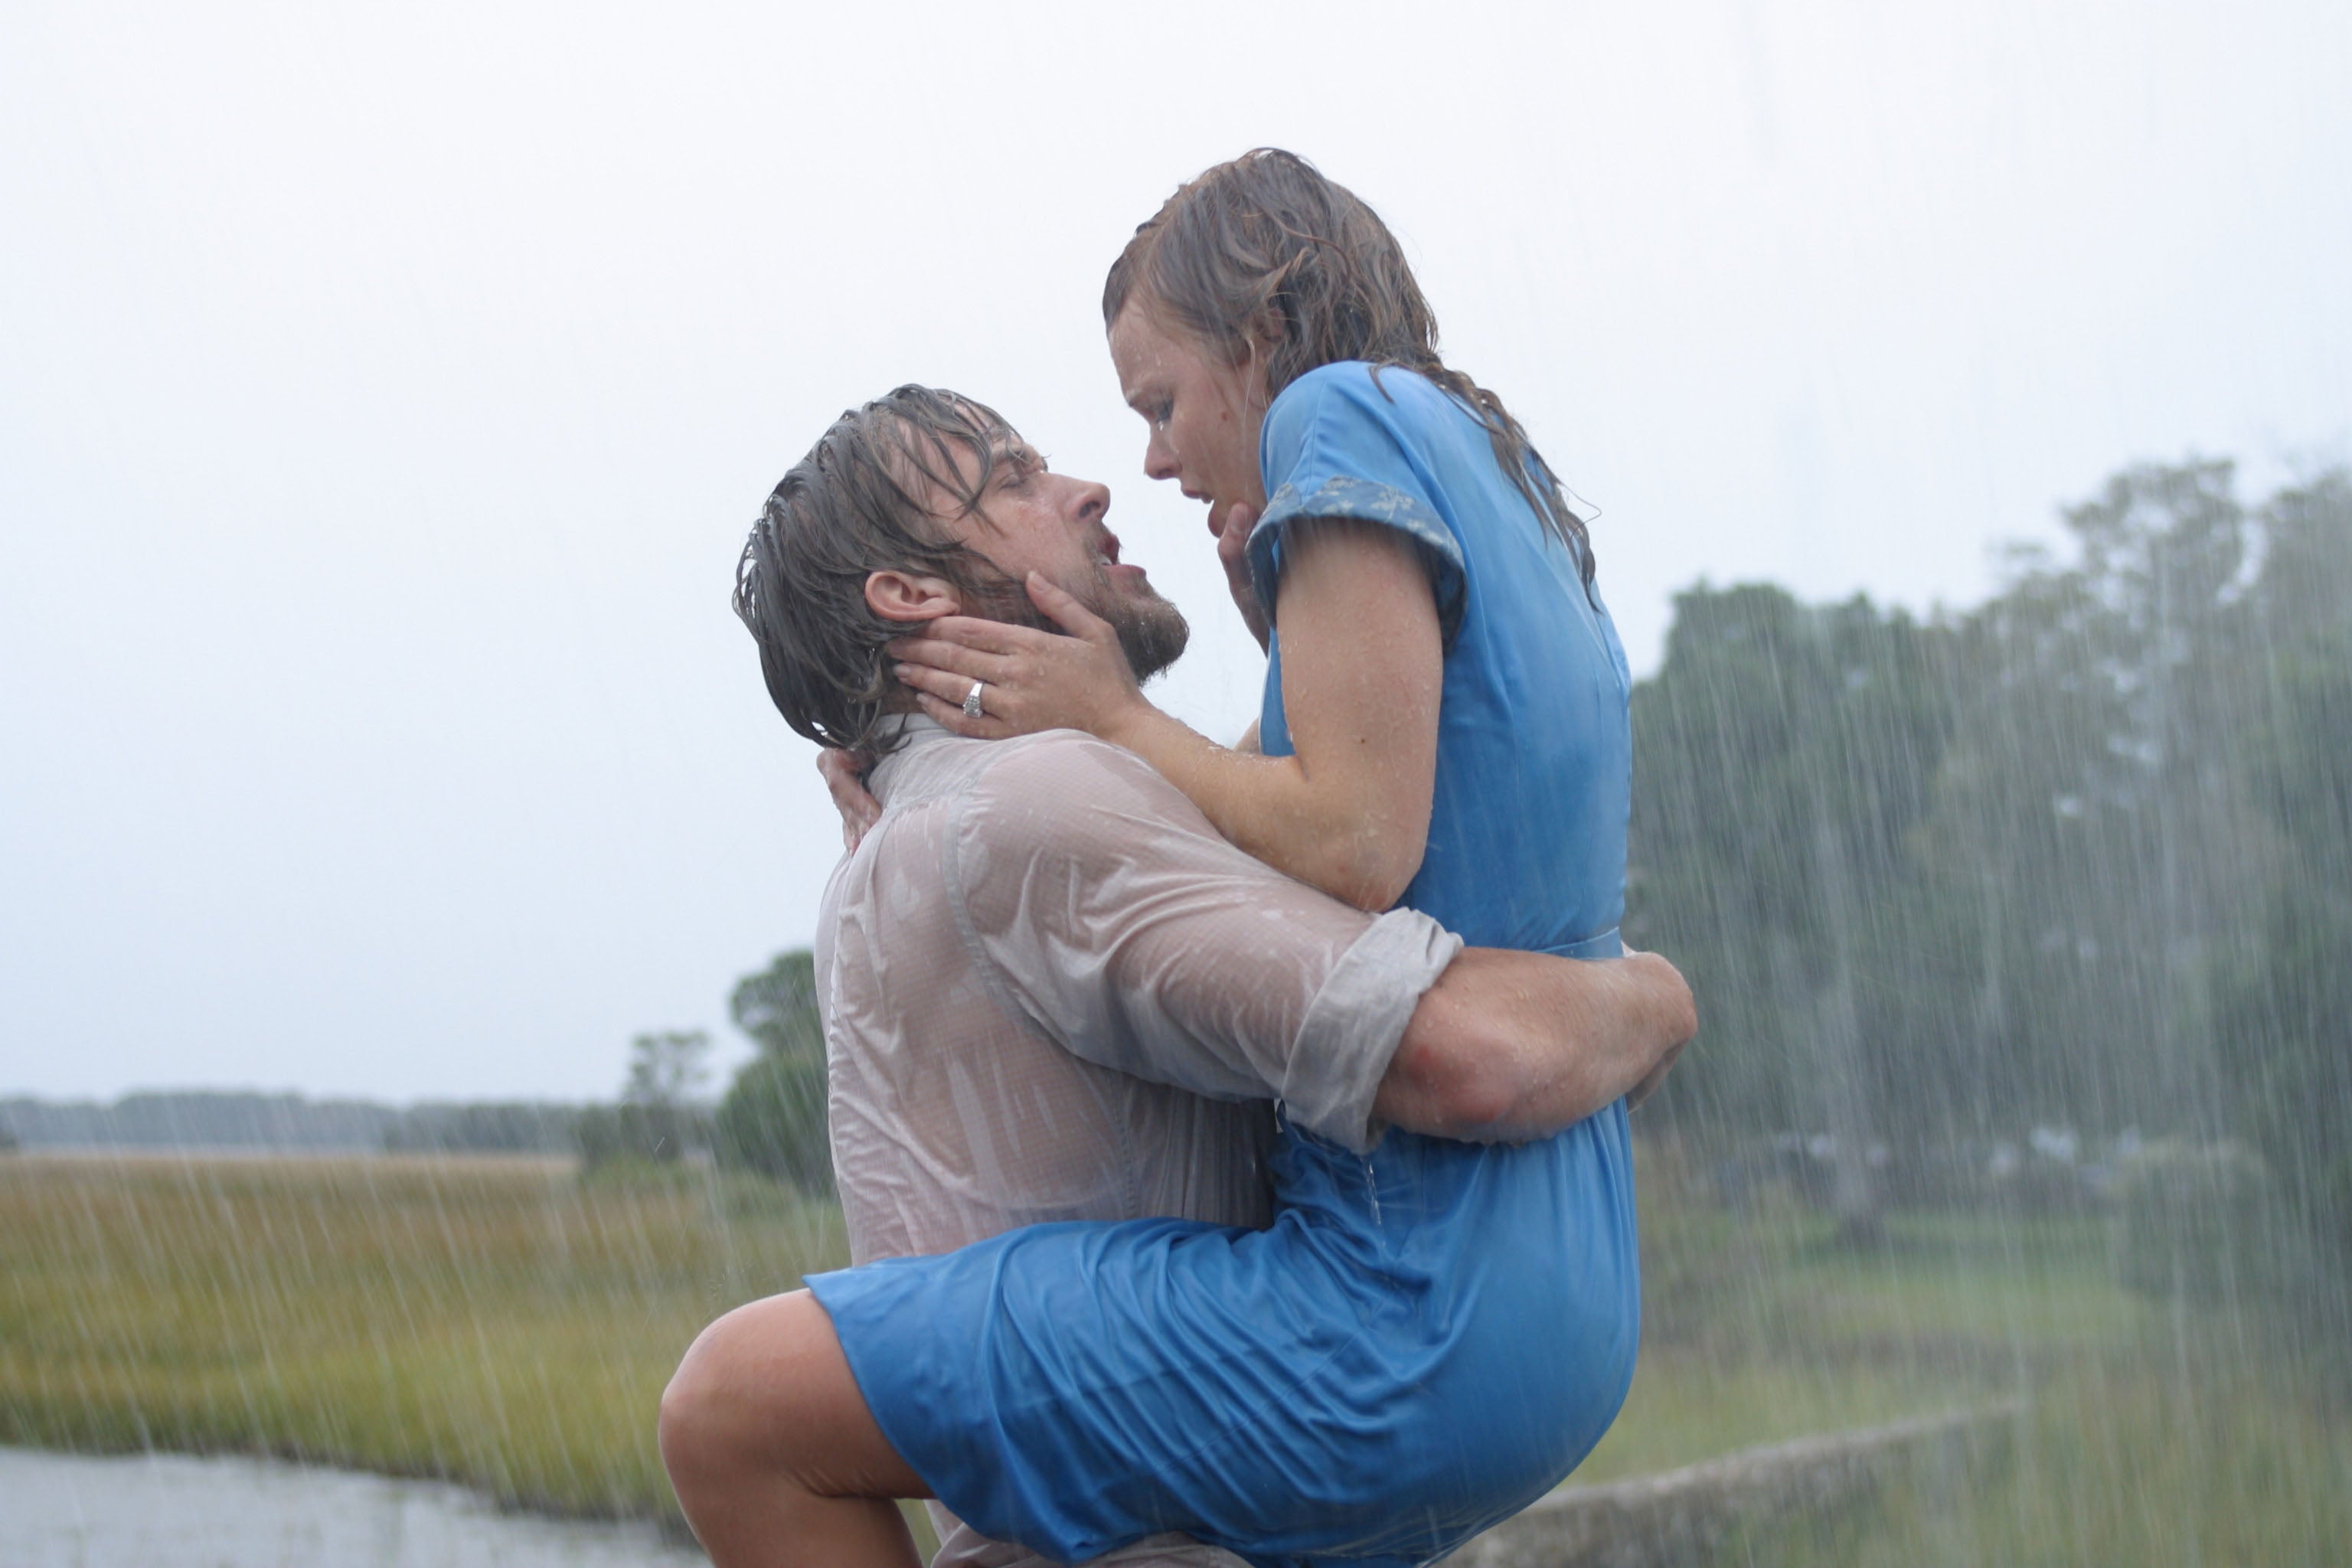 ‘The Notebook’ captured hearts with its classic love story set in 1940s America